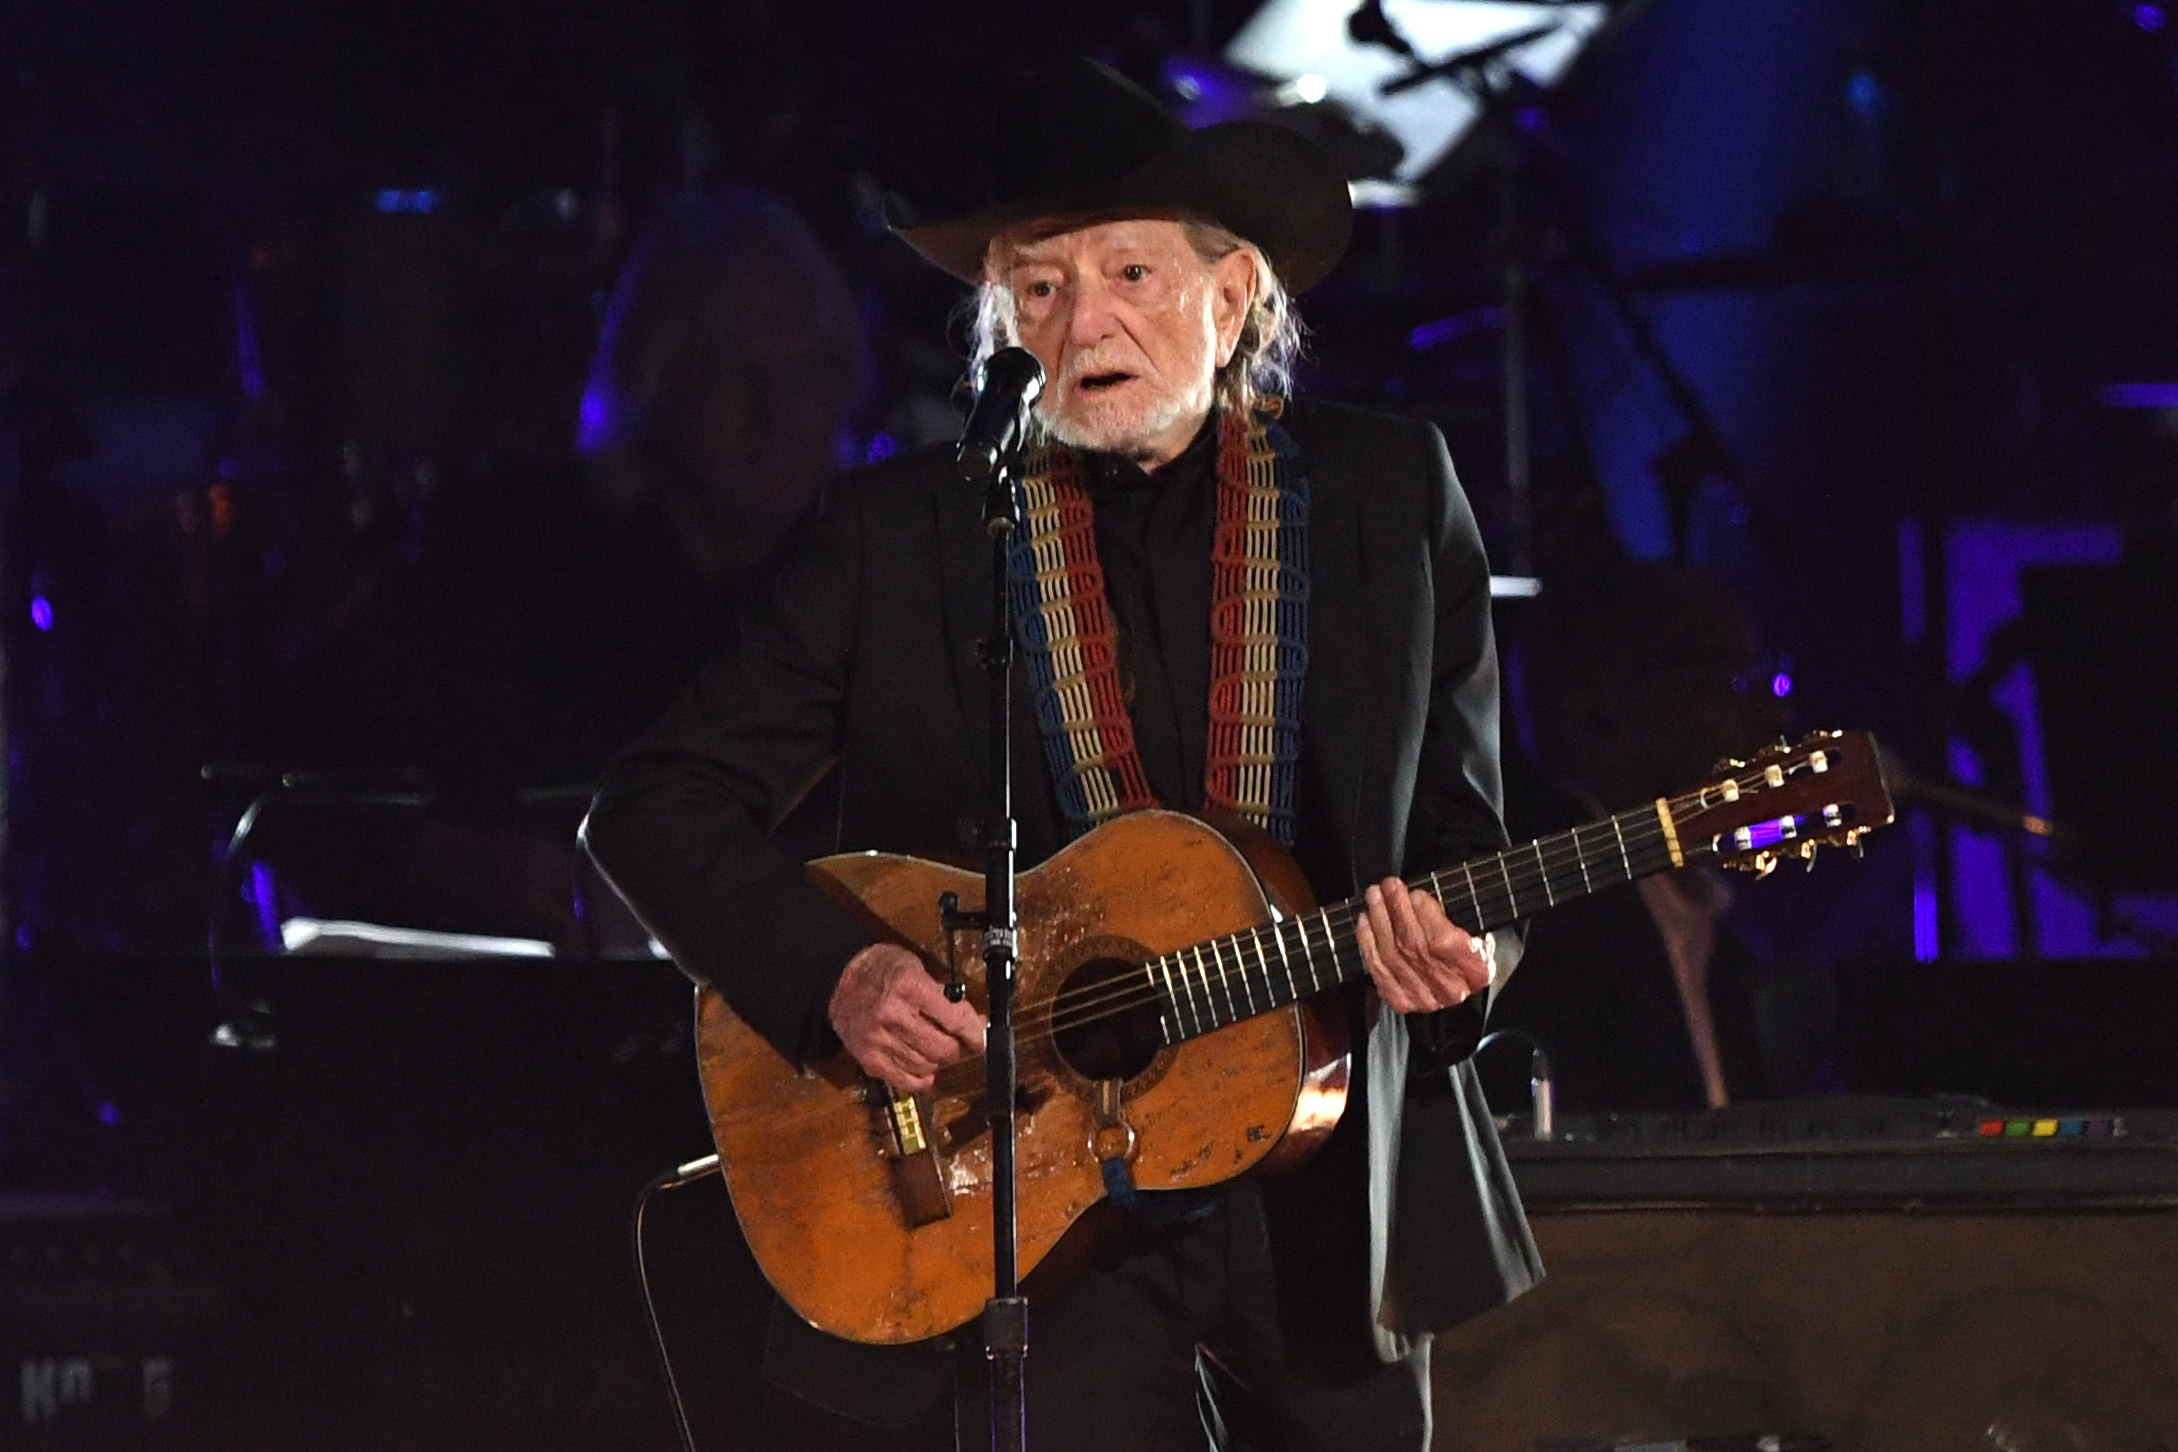 US musician Willie Nelson performs at the 2019 MusiCares Person Of The Year gala at the Los Angeles Convention Center in Los Angeles on February 8, 2019. - The 2019 MusiCares honor US singer-songwriter Dolly Parton as the Person Of The Year. (Photo credit VALERIE MACON/AFP via Getty Images)